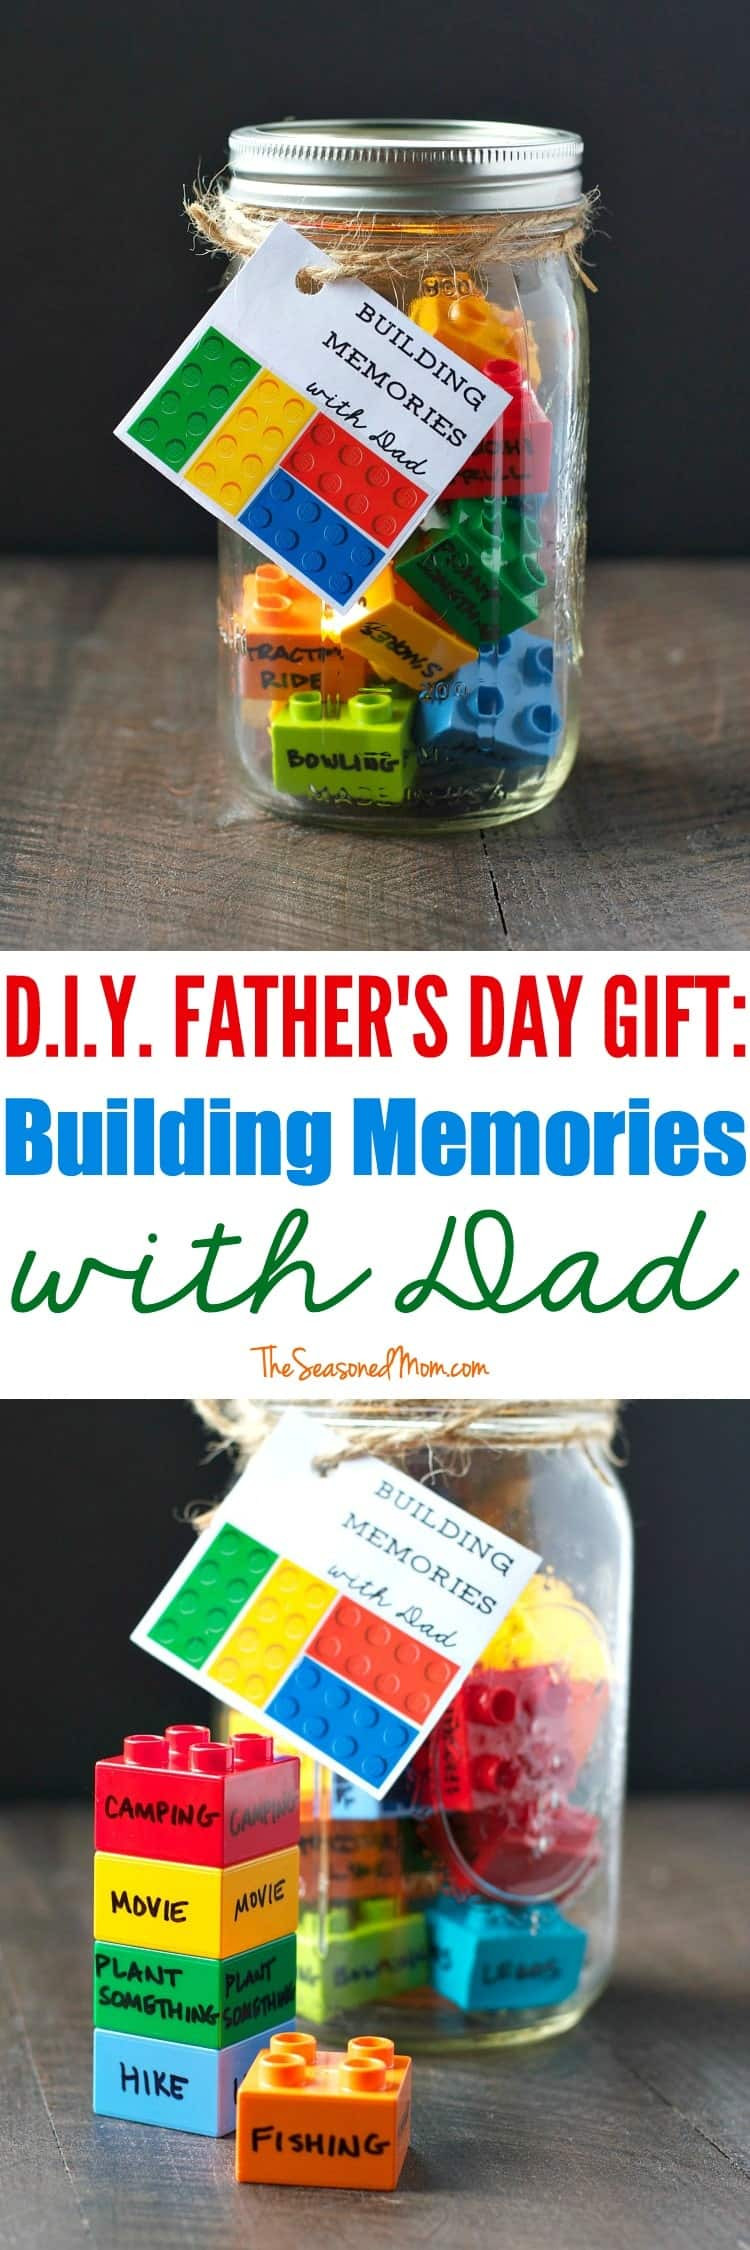 DIY Father'S Day Gifts From Kids
 DIY Father s Day Gift Building Memories with Dad The